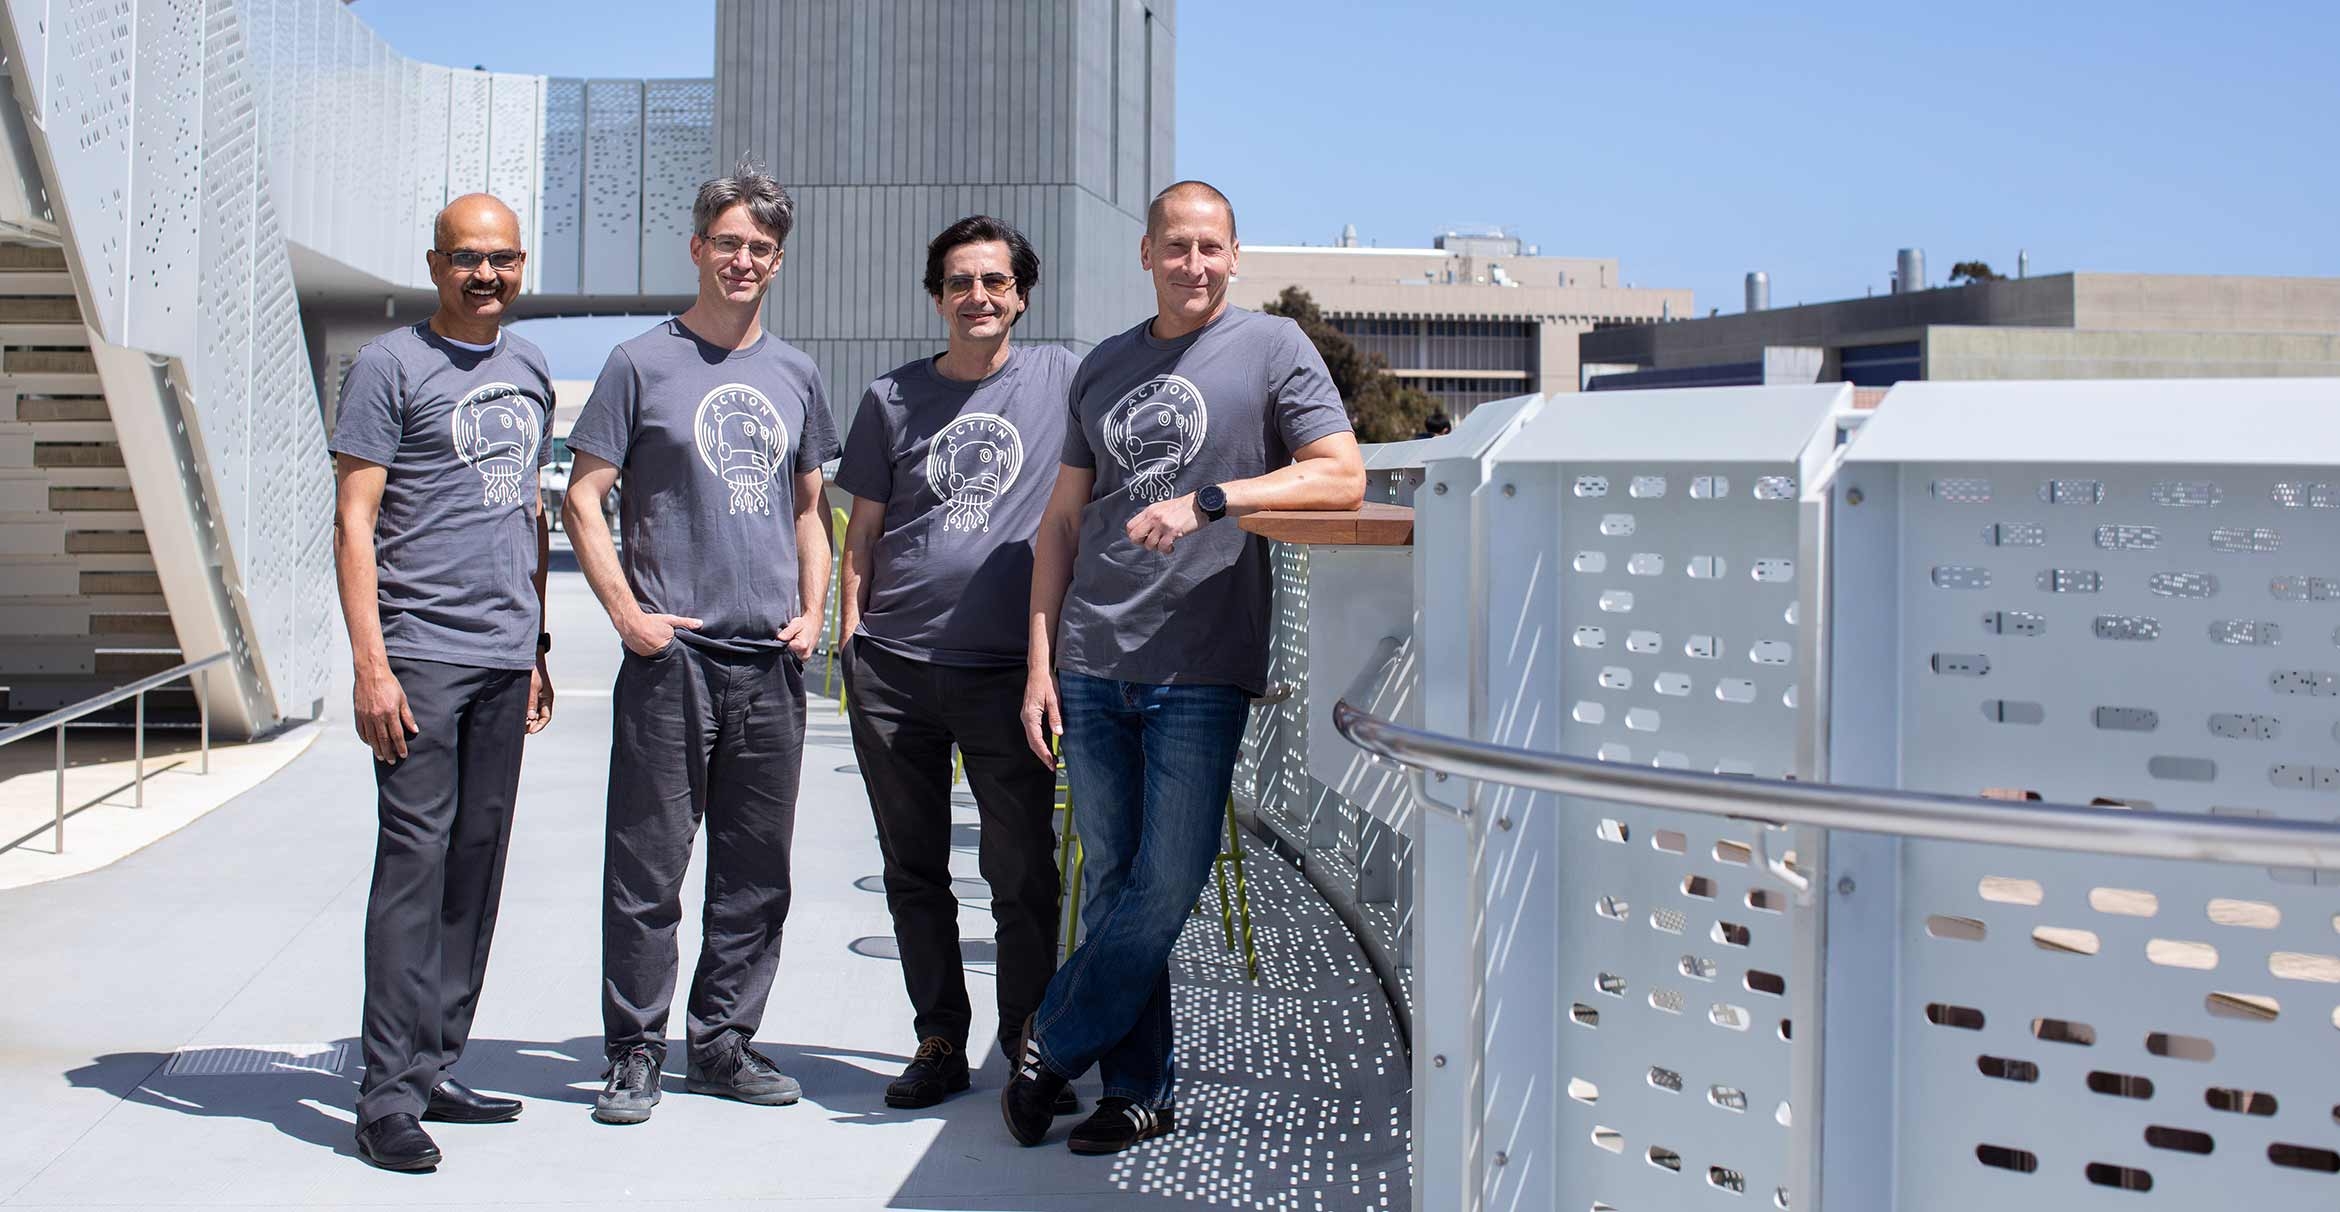 group of researchers in gray t-shirts standing outside a modern building